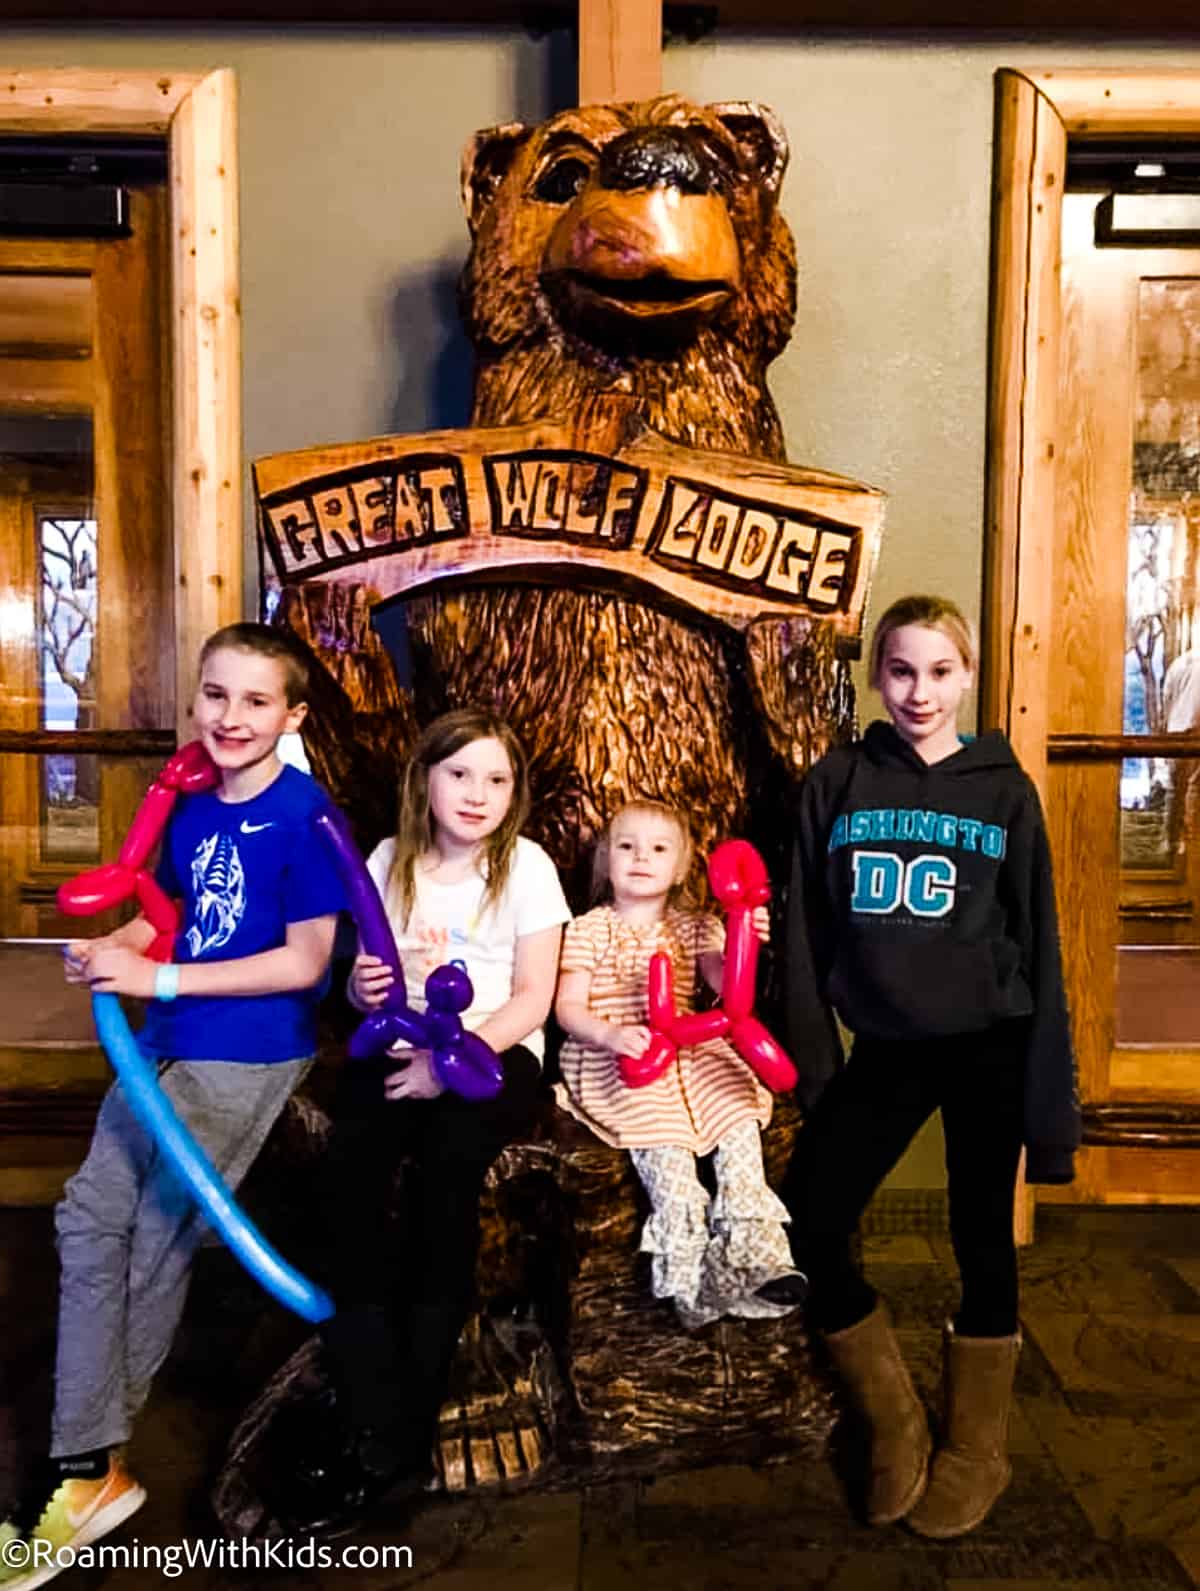 Things to do in the Poconos with kids - Great Wolf Lodge